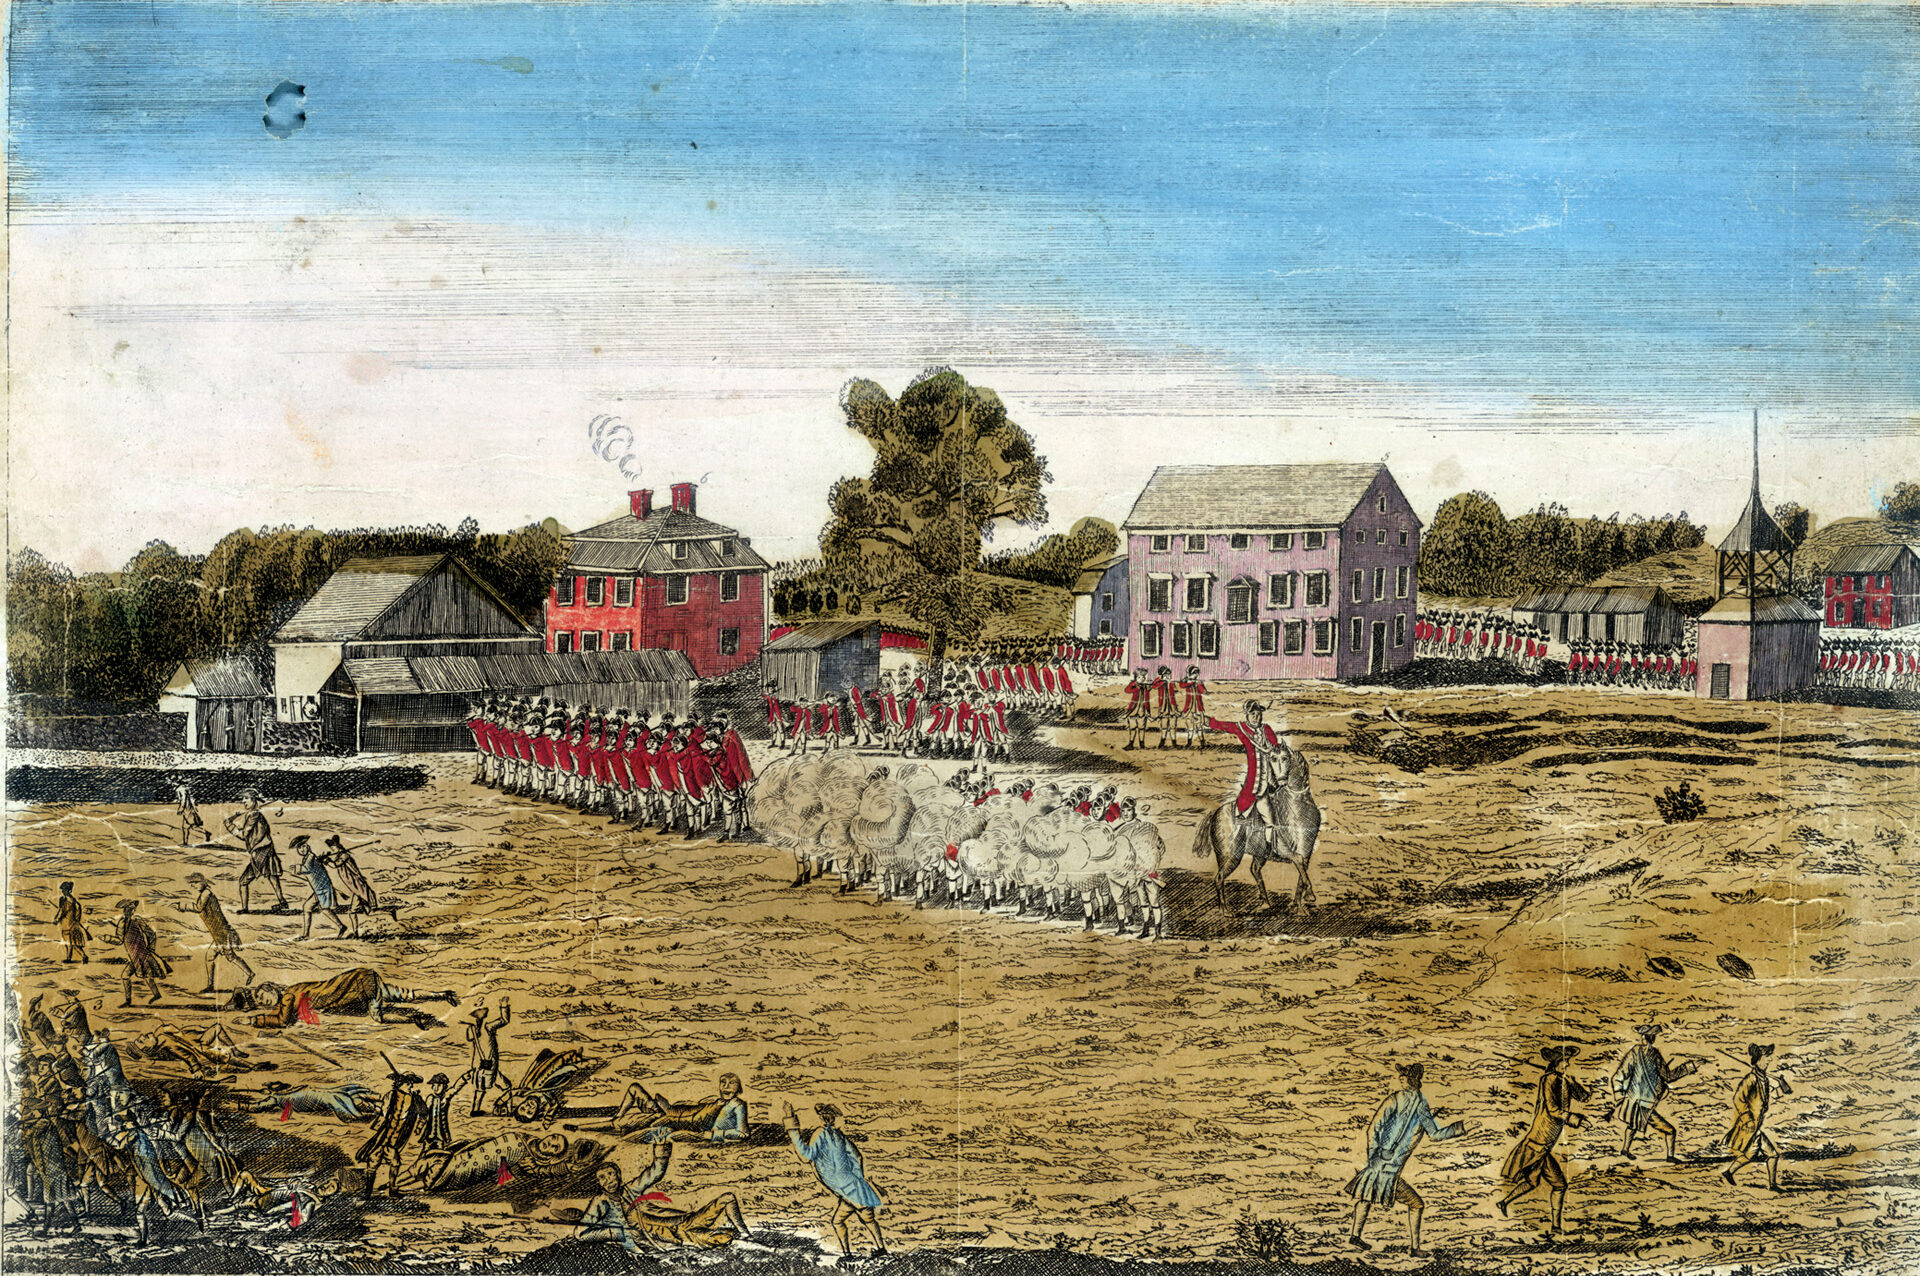 A volley by British regulars shatters the Lexington militia on April 19, 1775. In open terrain, the poorly trained American militia simply could not match British infantry.